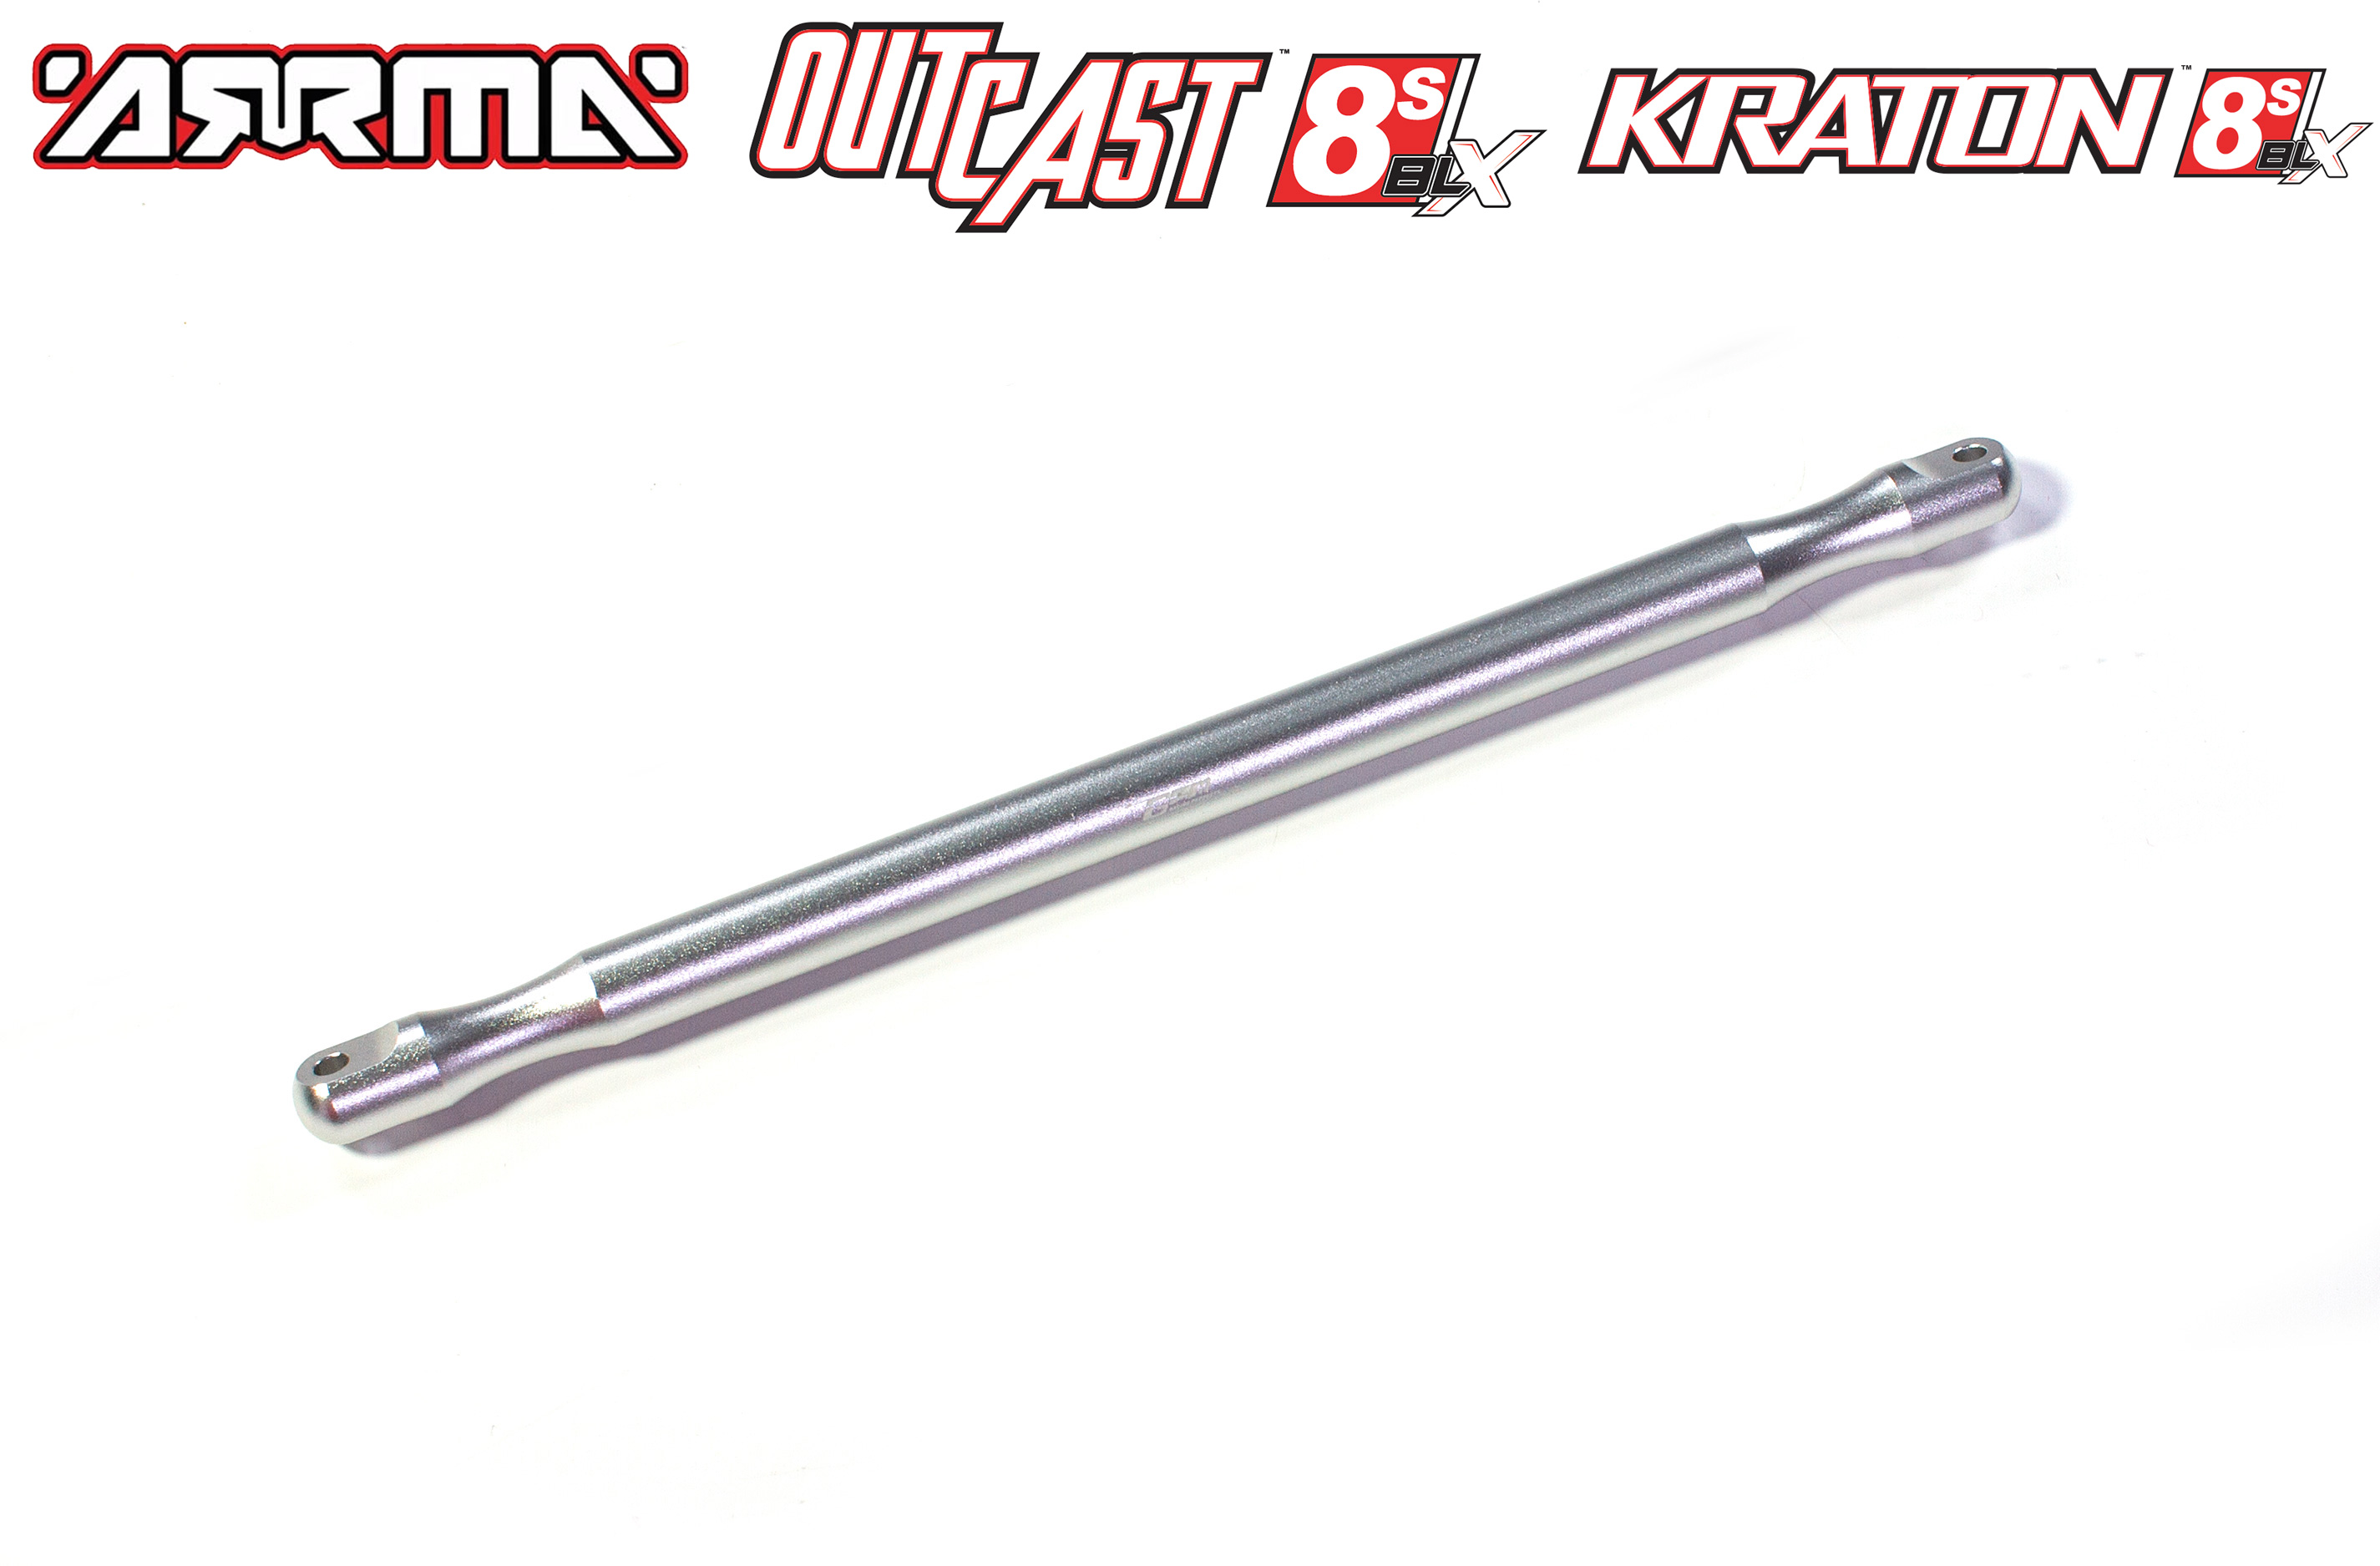 AKX025F GPM front chassis strut for Arrma Kraton / Outcast 8S